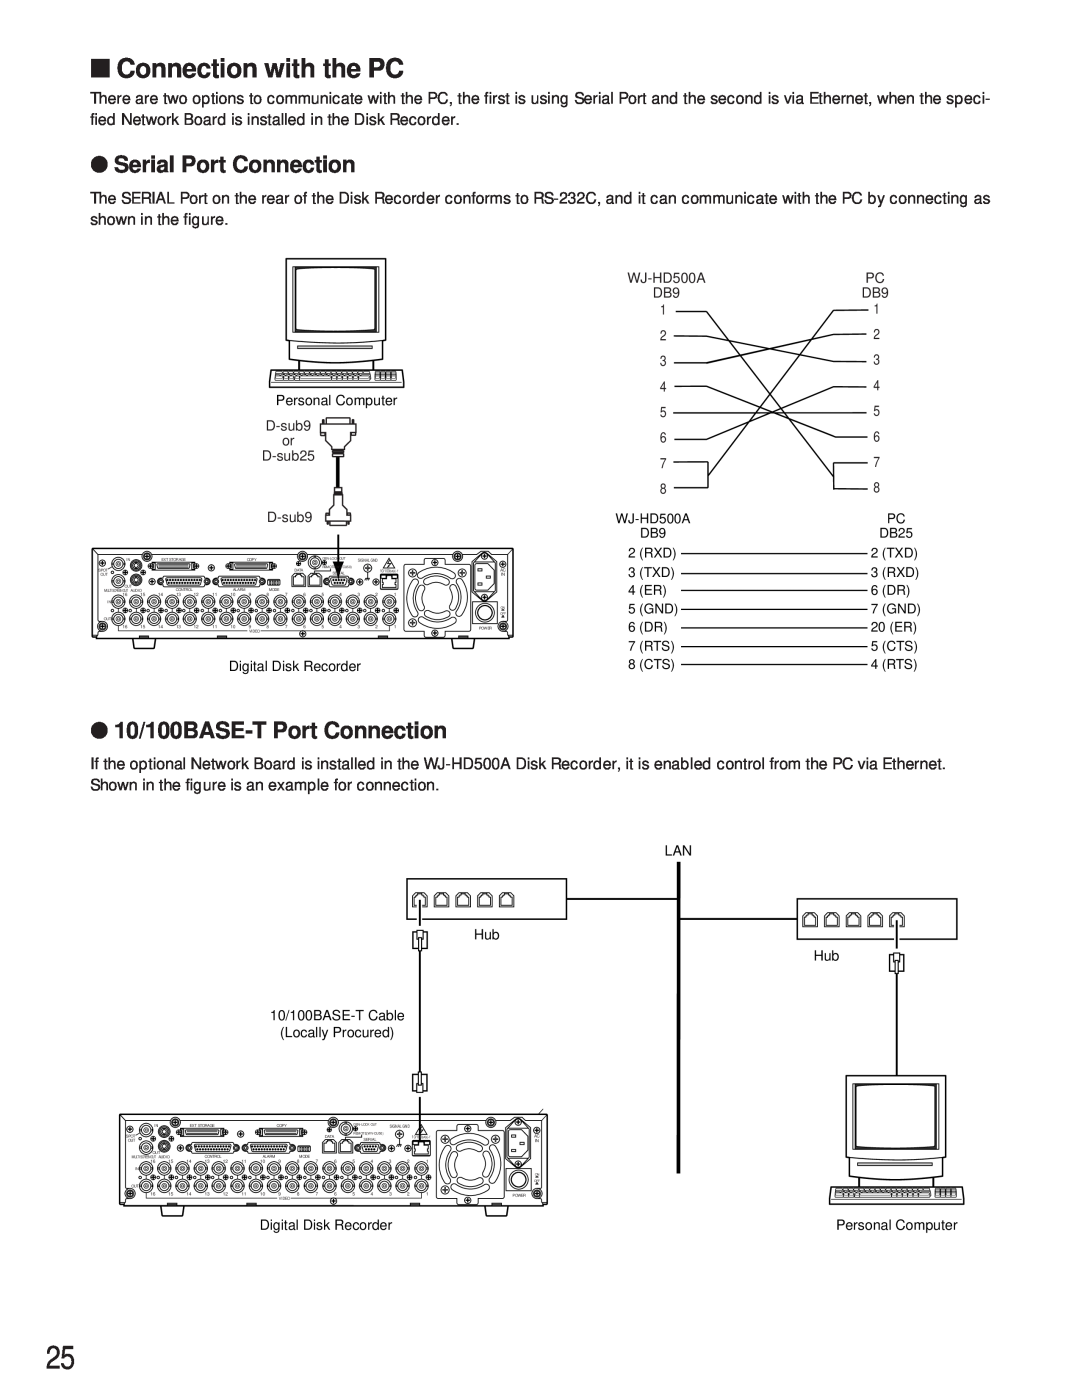 Panasonic WJ-HD500A manual Connection with the PC, Serial Port Connection, 10/100BASE-T Port Connection 